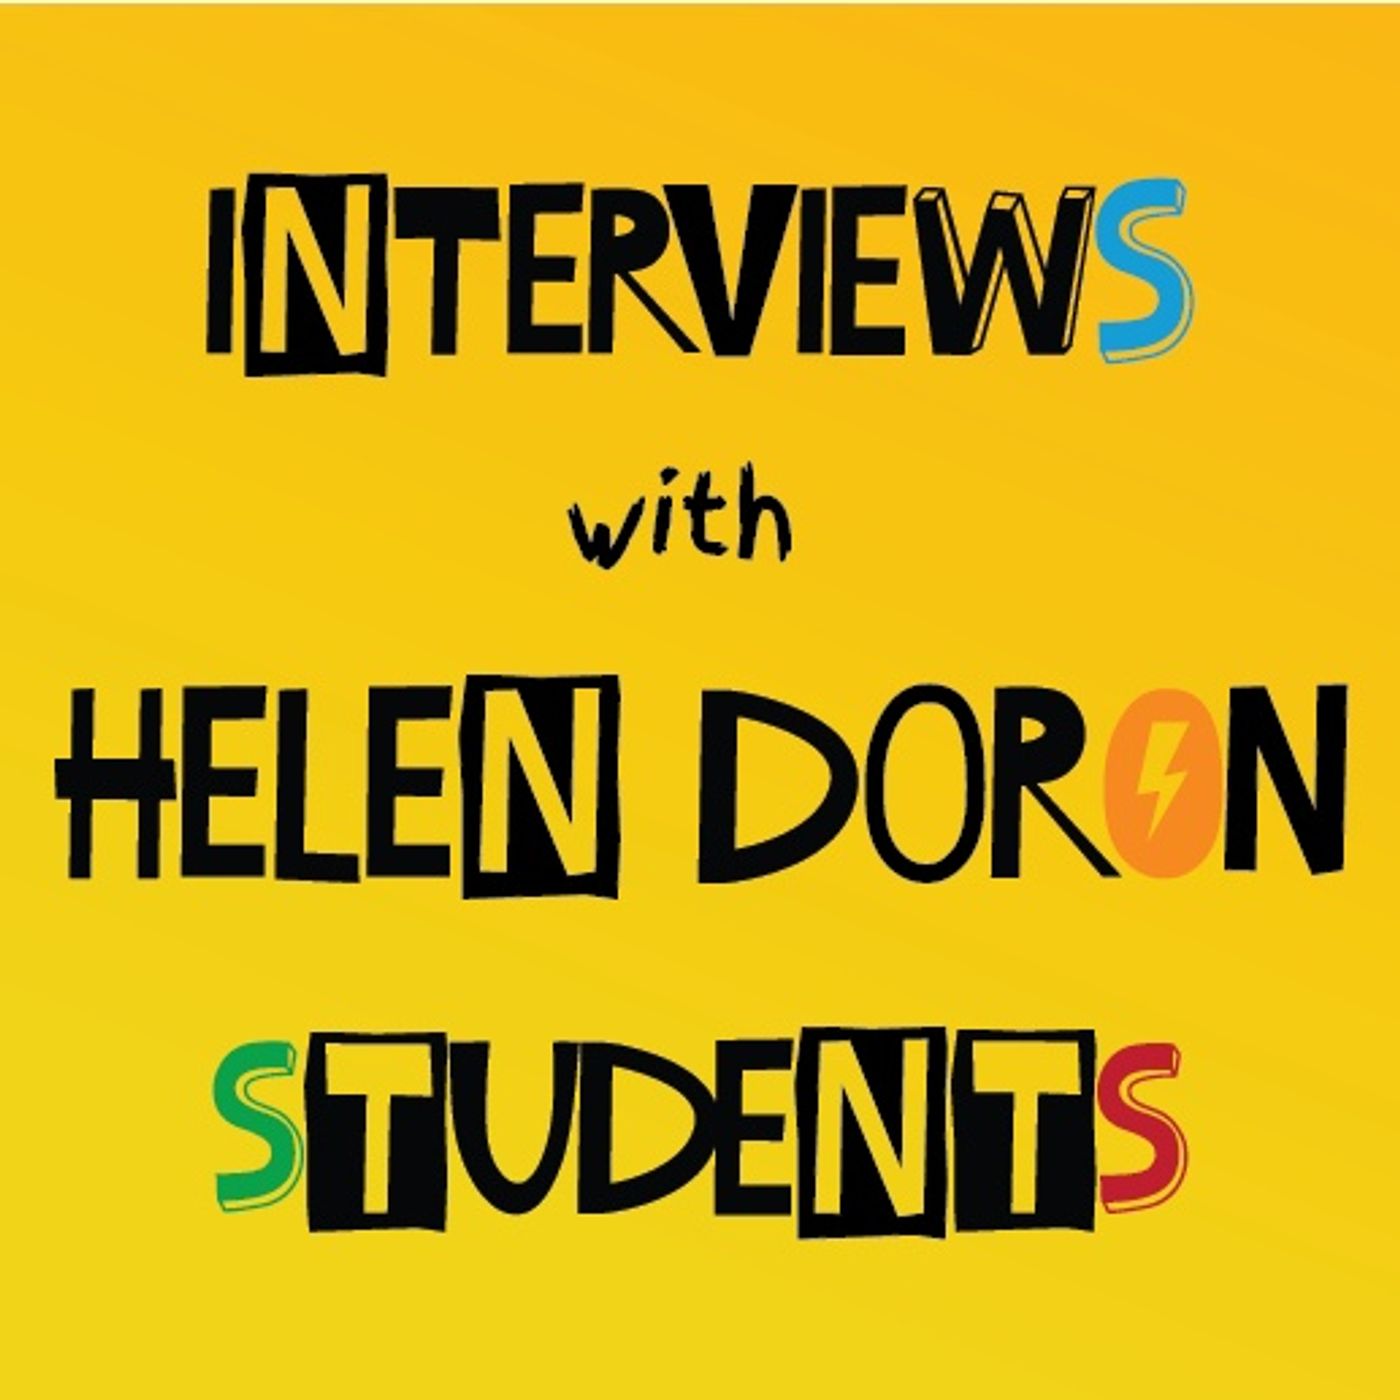 Interview with Helen Doron Students from Bad Wiessee Germany Part 1